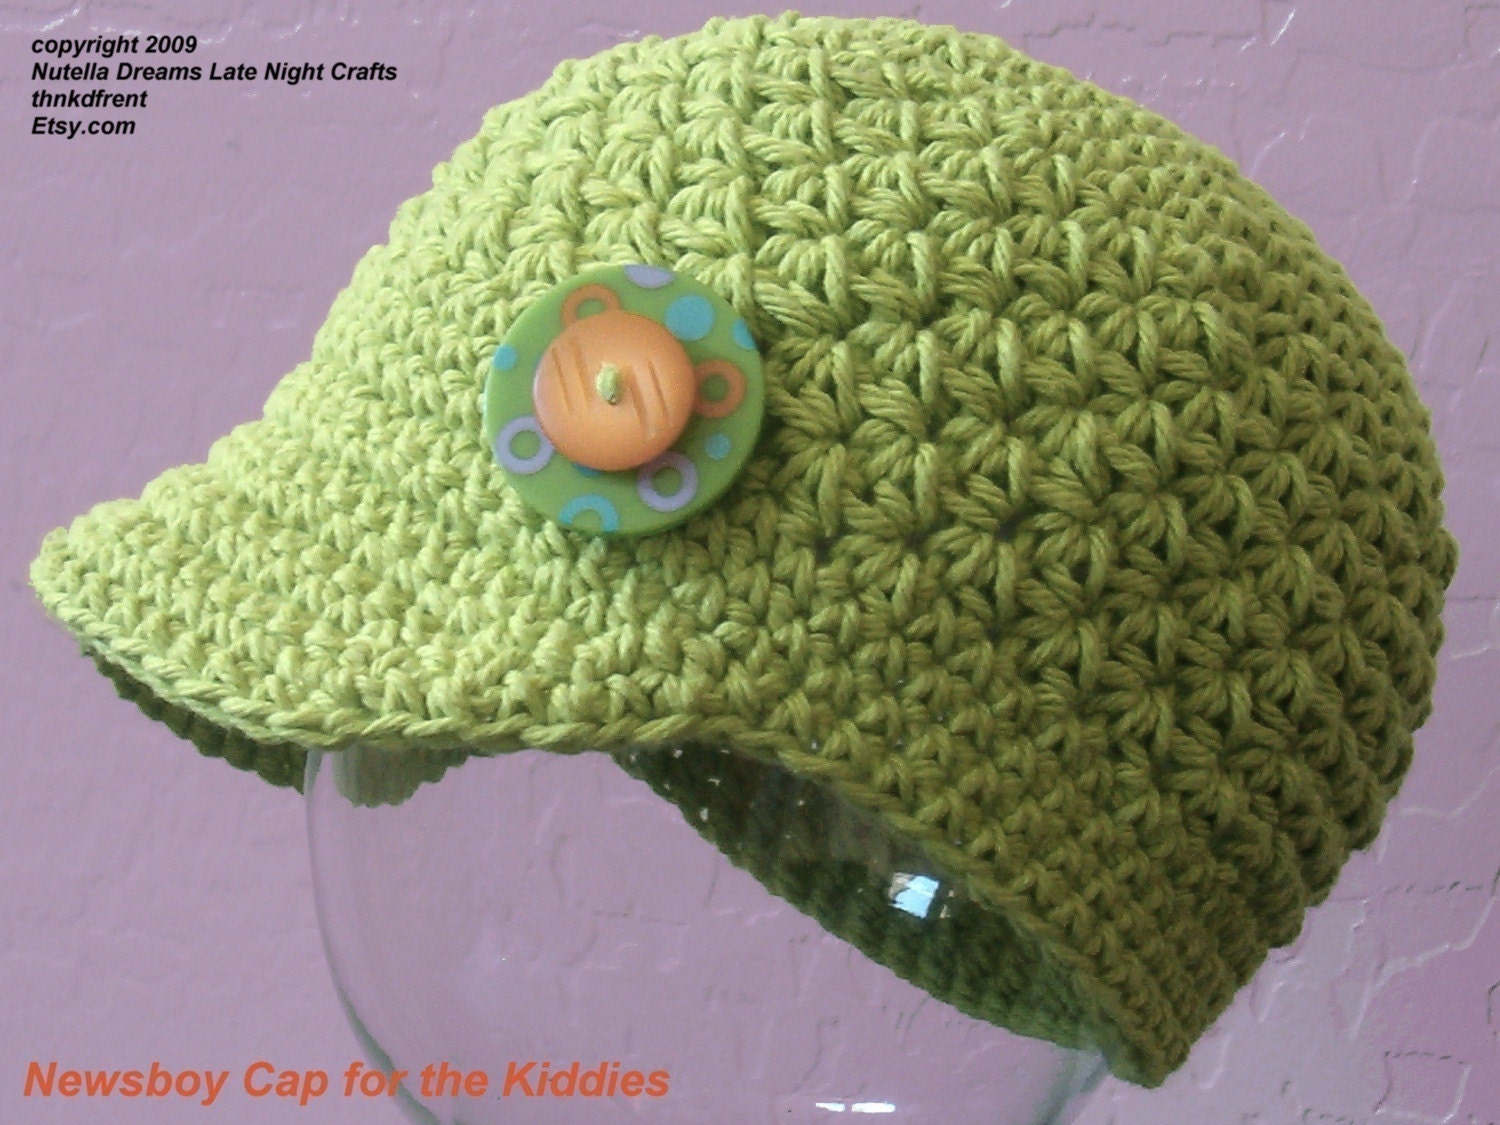 Crochet or knit newsboy cap and hat patterns FREE - Providence